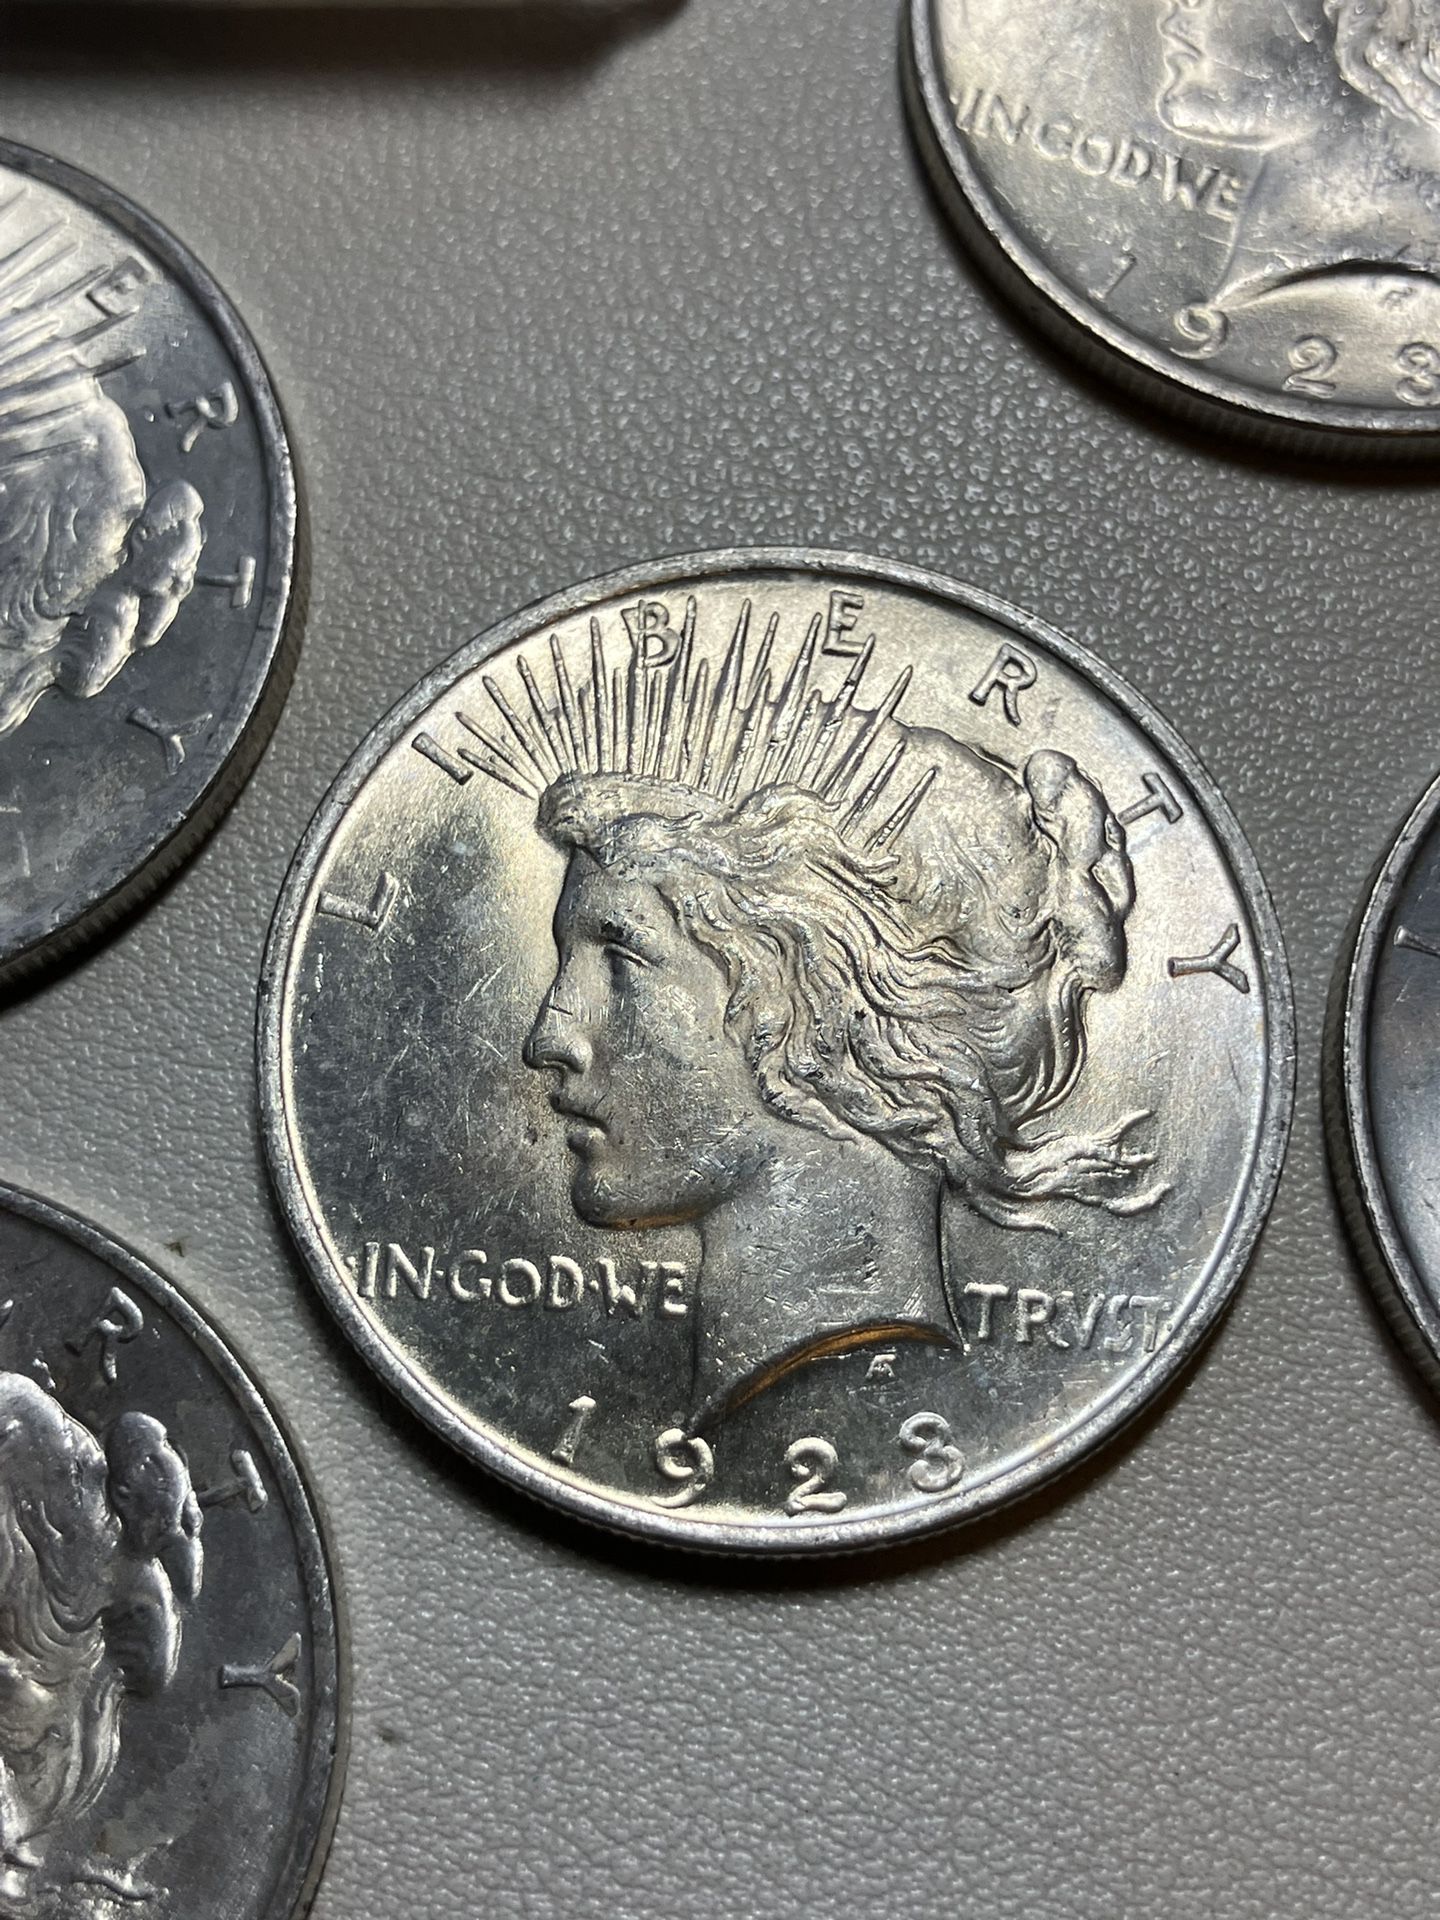 1923 Peace Silver Dollars Uncirculated Gems !